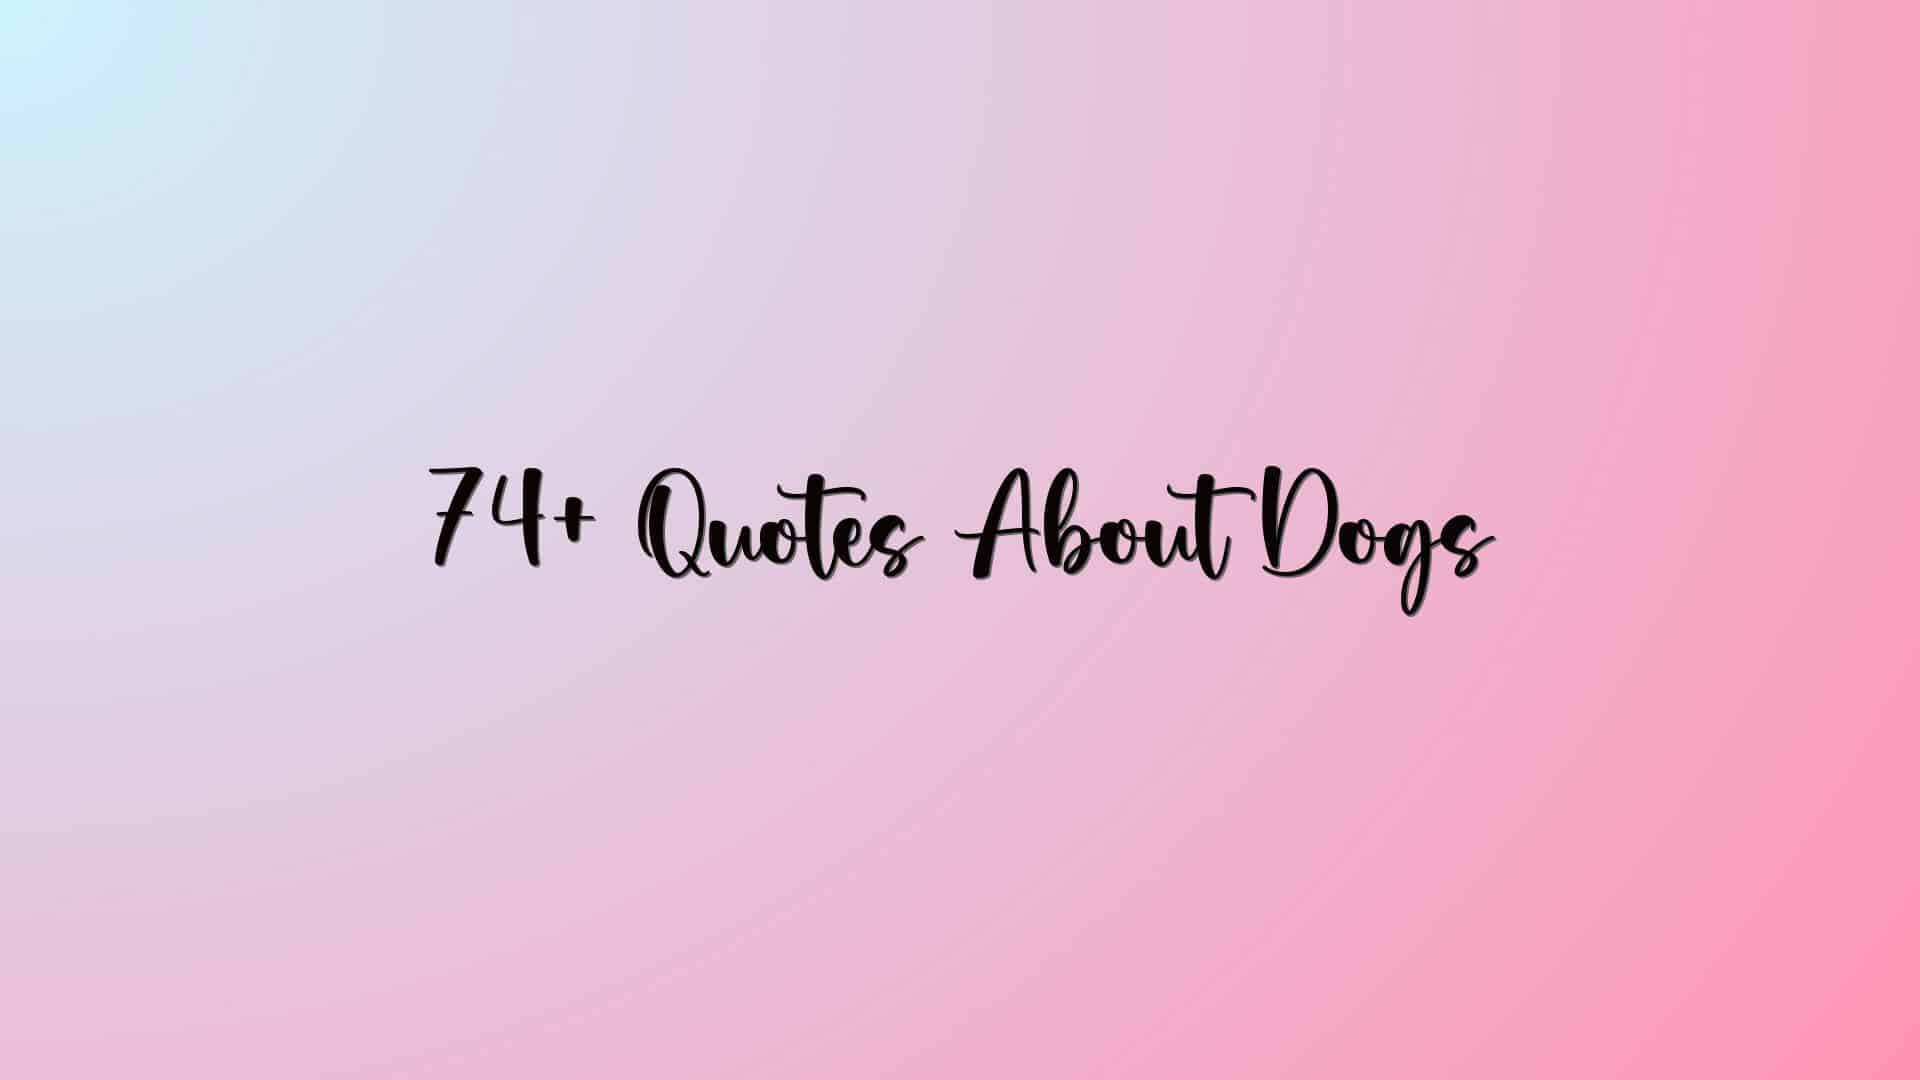 74+ Quotes About Dogs